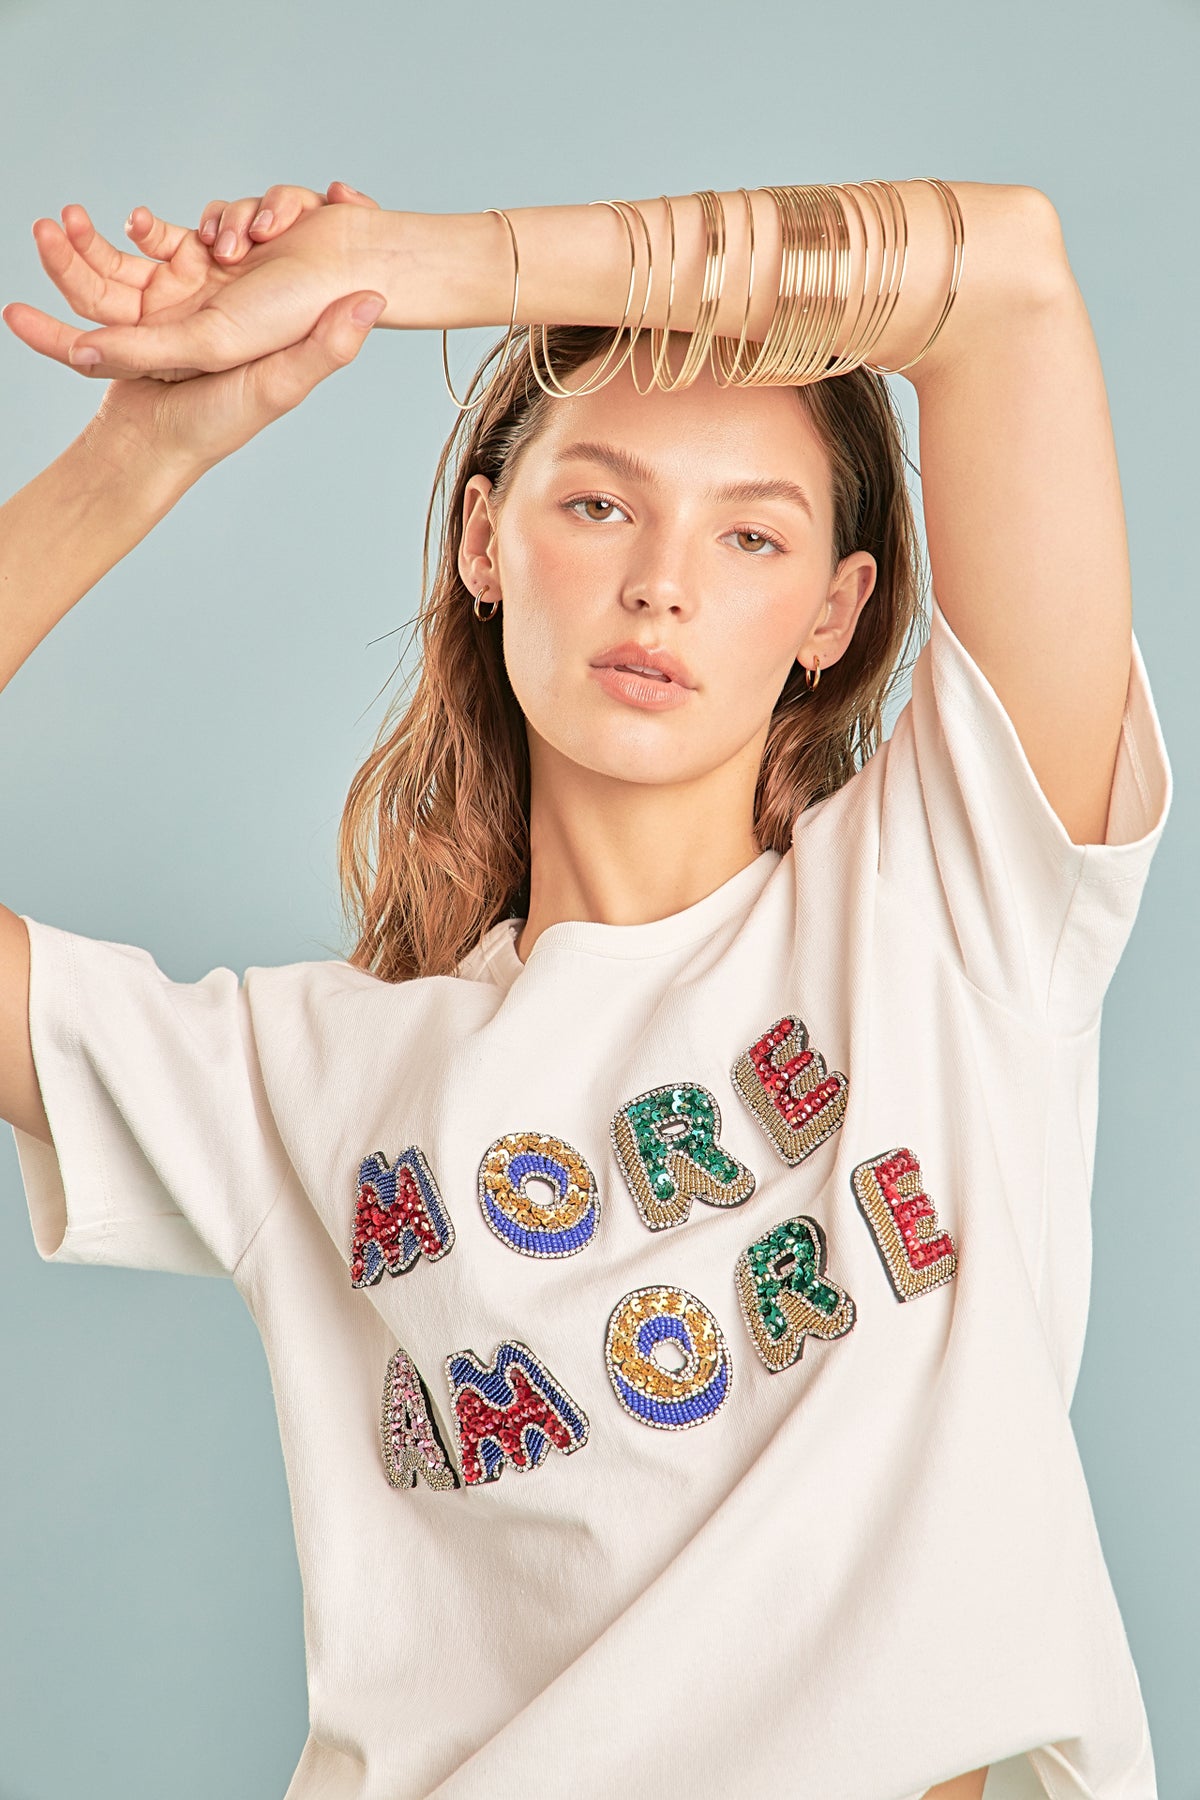 ENDLESS ROSE - More Amore Embellished Sweatshirt - T-SHIRTS available at Objectrare